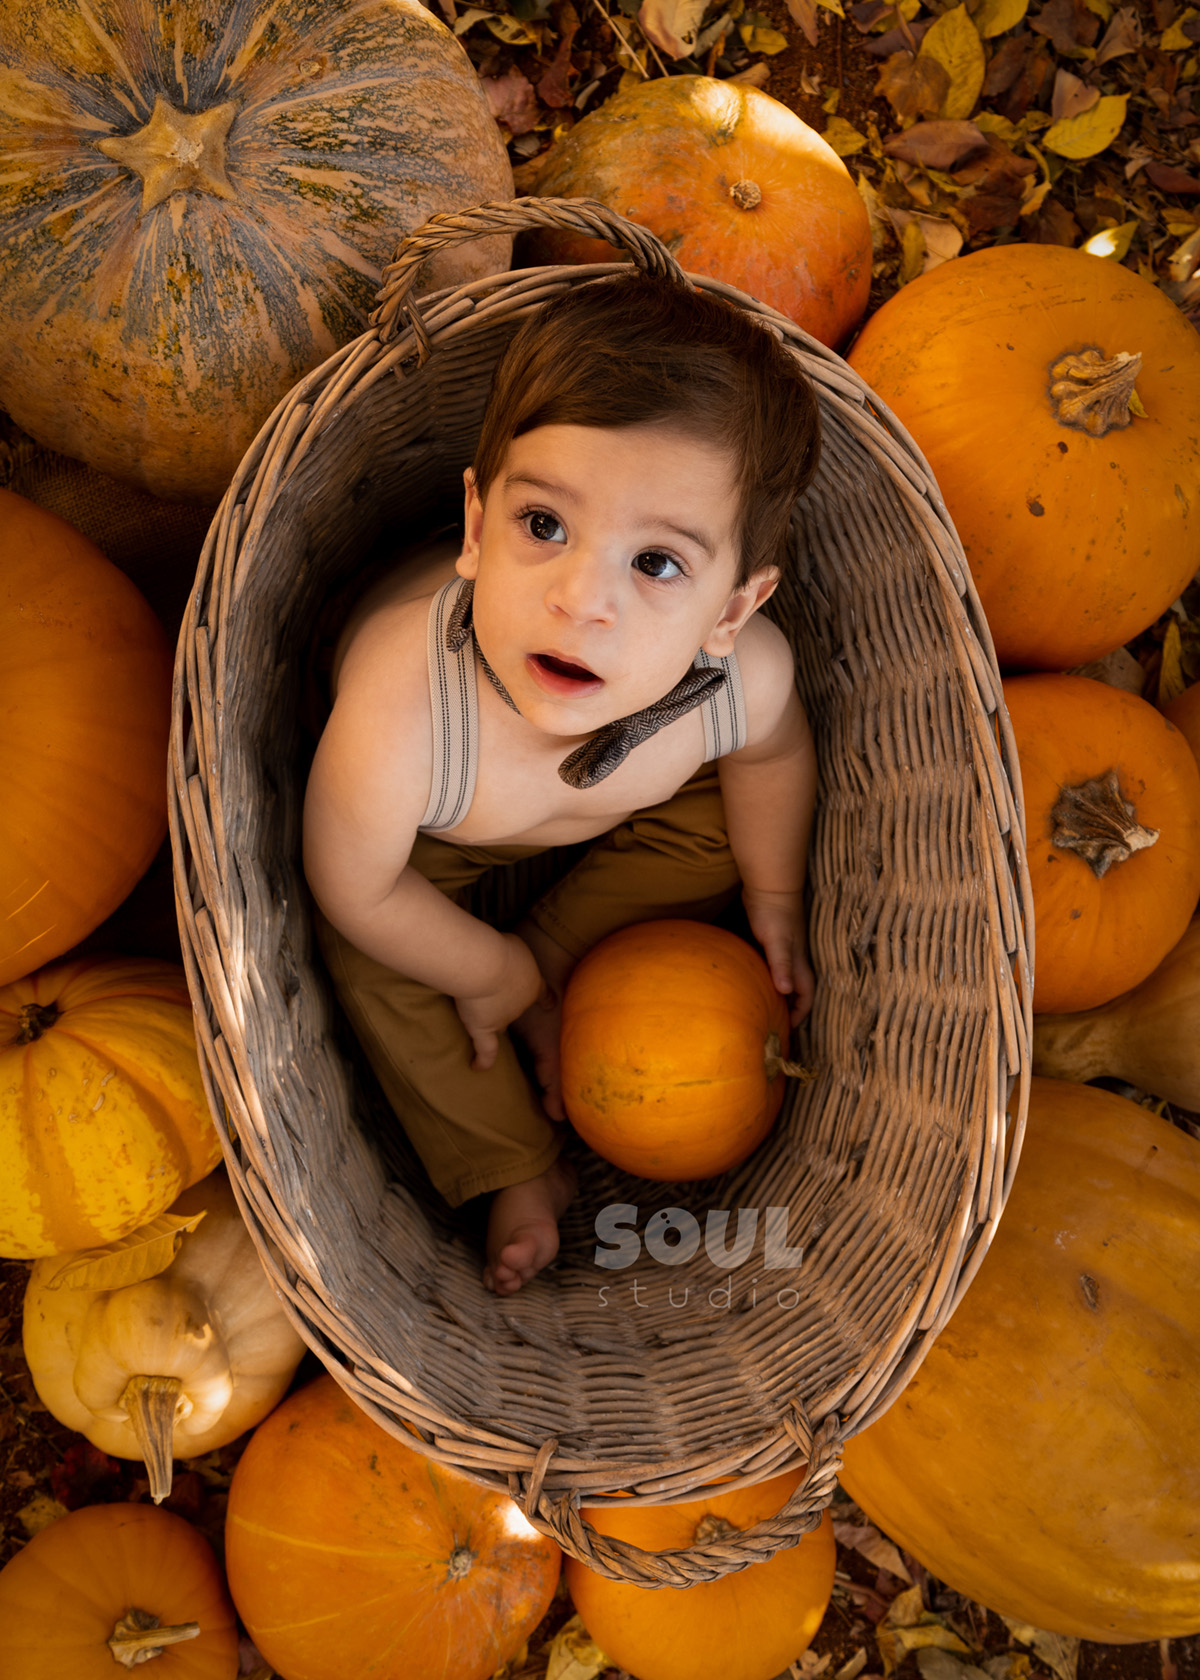 baby outdoor autumn fall setup 1 year old sitter boy pumpkin patch dry leaves orange yellow red squash